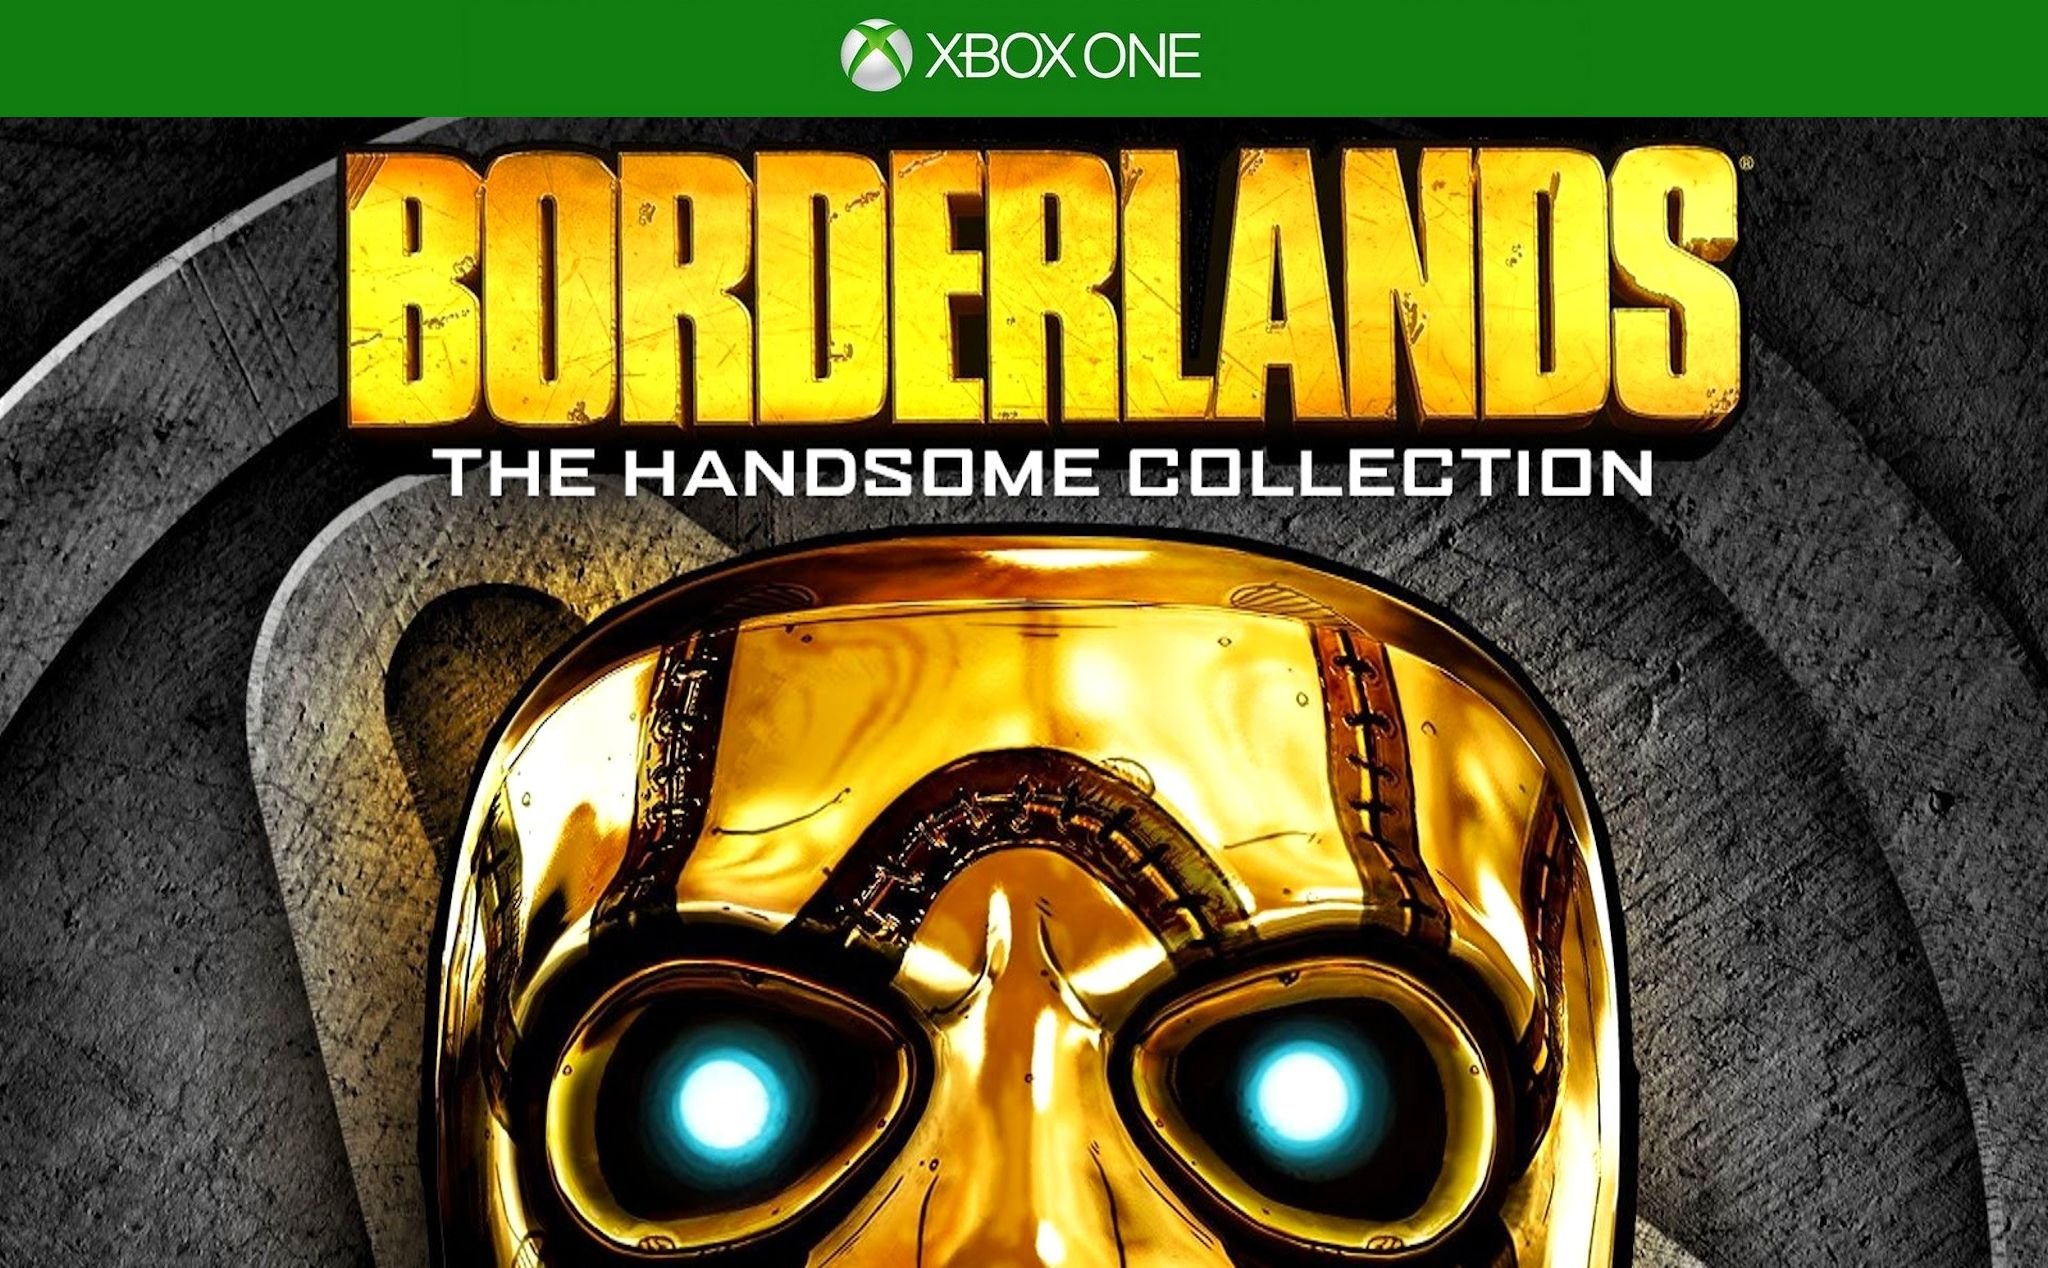 The handsome collection. Бордерлендс the handsome collection. Borderlands the handsome collection ps4. Borderlands the handsome collection ps4 обложка. Borderlands the handsome collection Xbox.